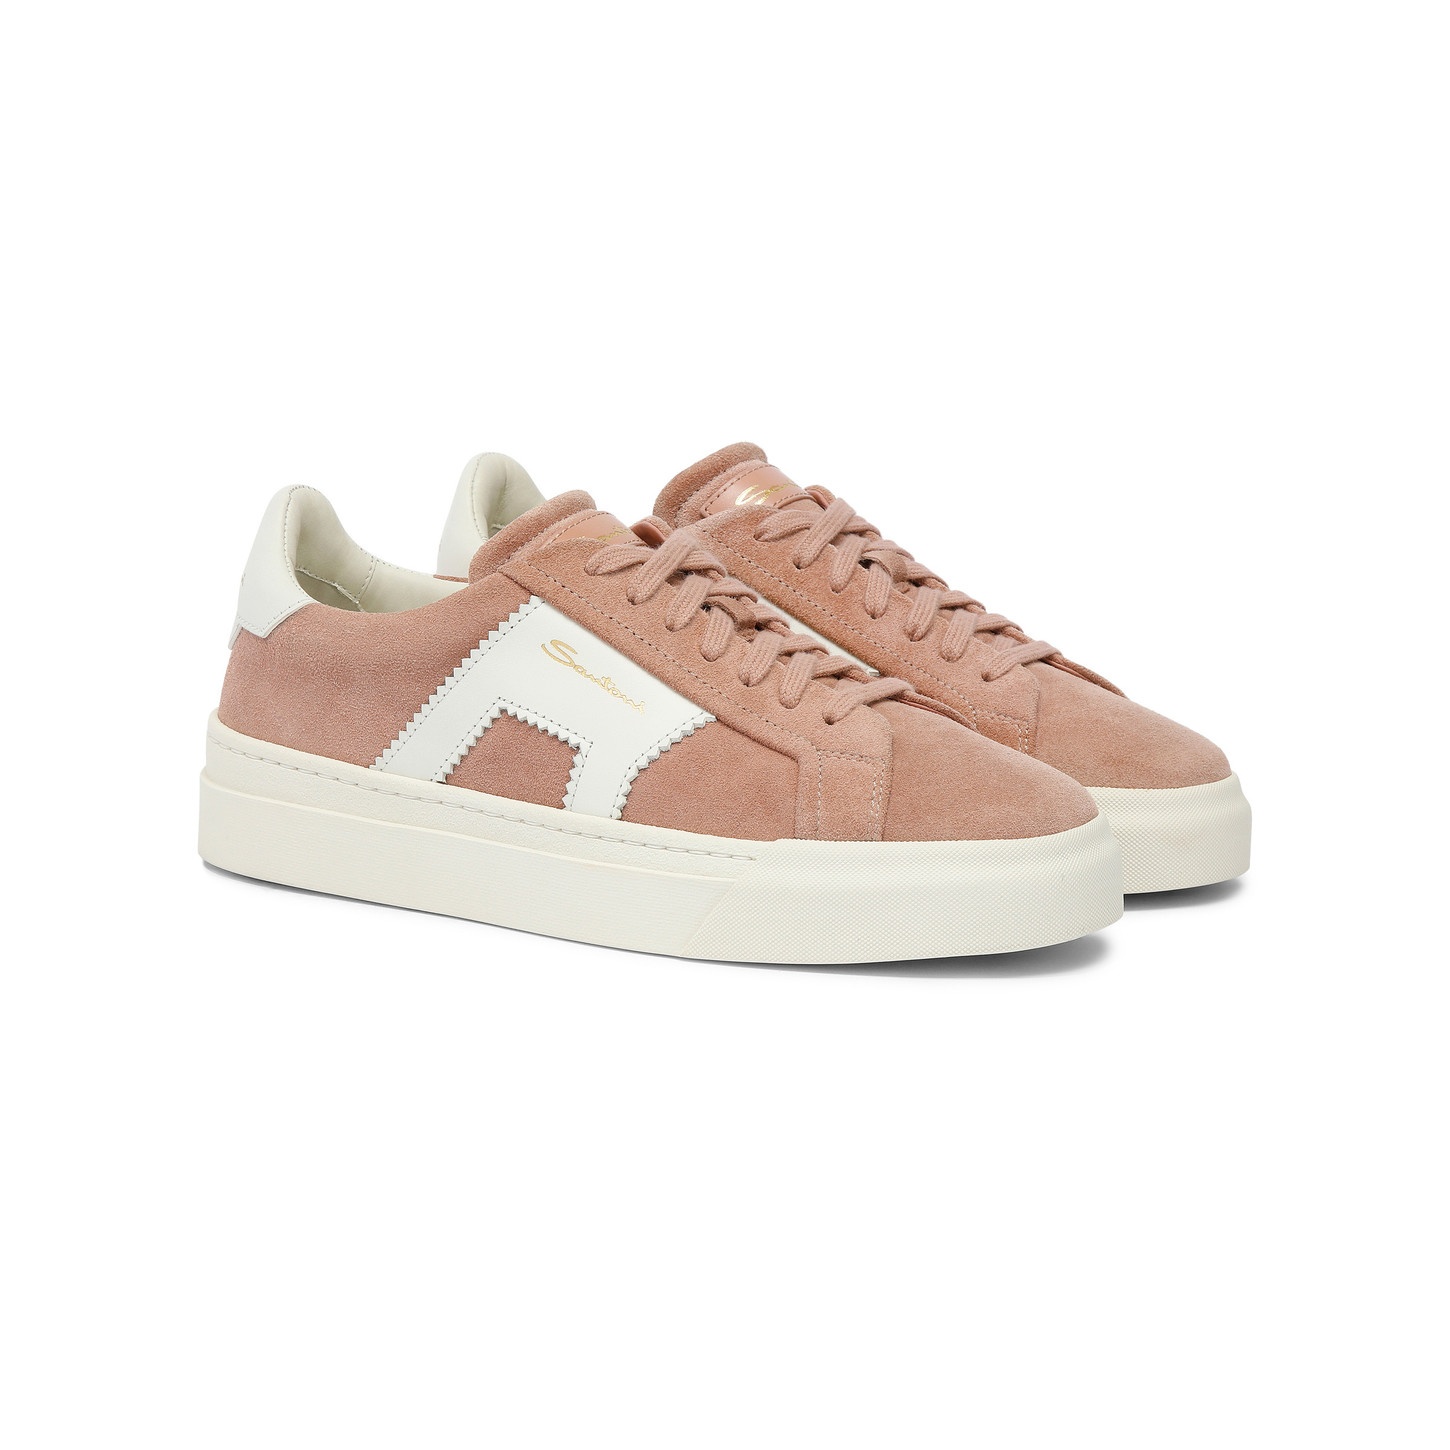 Women’s pink and white suede and leather double buckle sneaker - 3